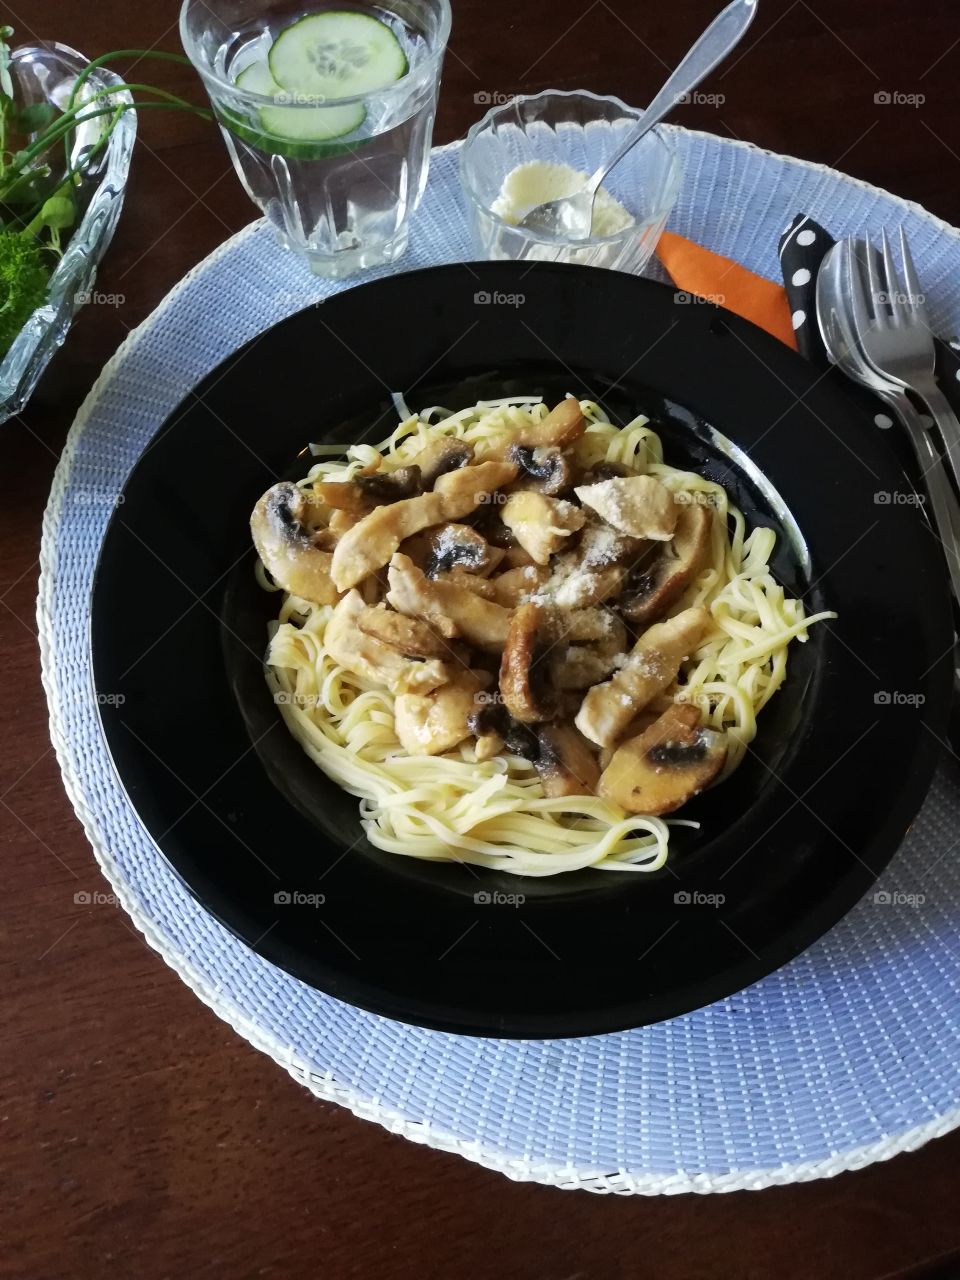 A black plate full of spagetti with chicken, mushrooms and parmesan on a light blue place mat. A glass of water with slices of cucumber and napkins, a fork, a spoon and a bowl of cheese on the table.